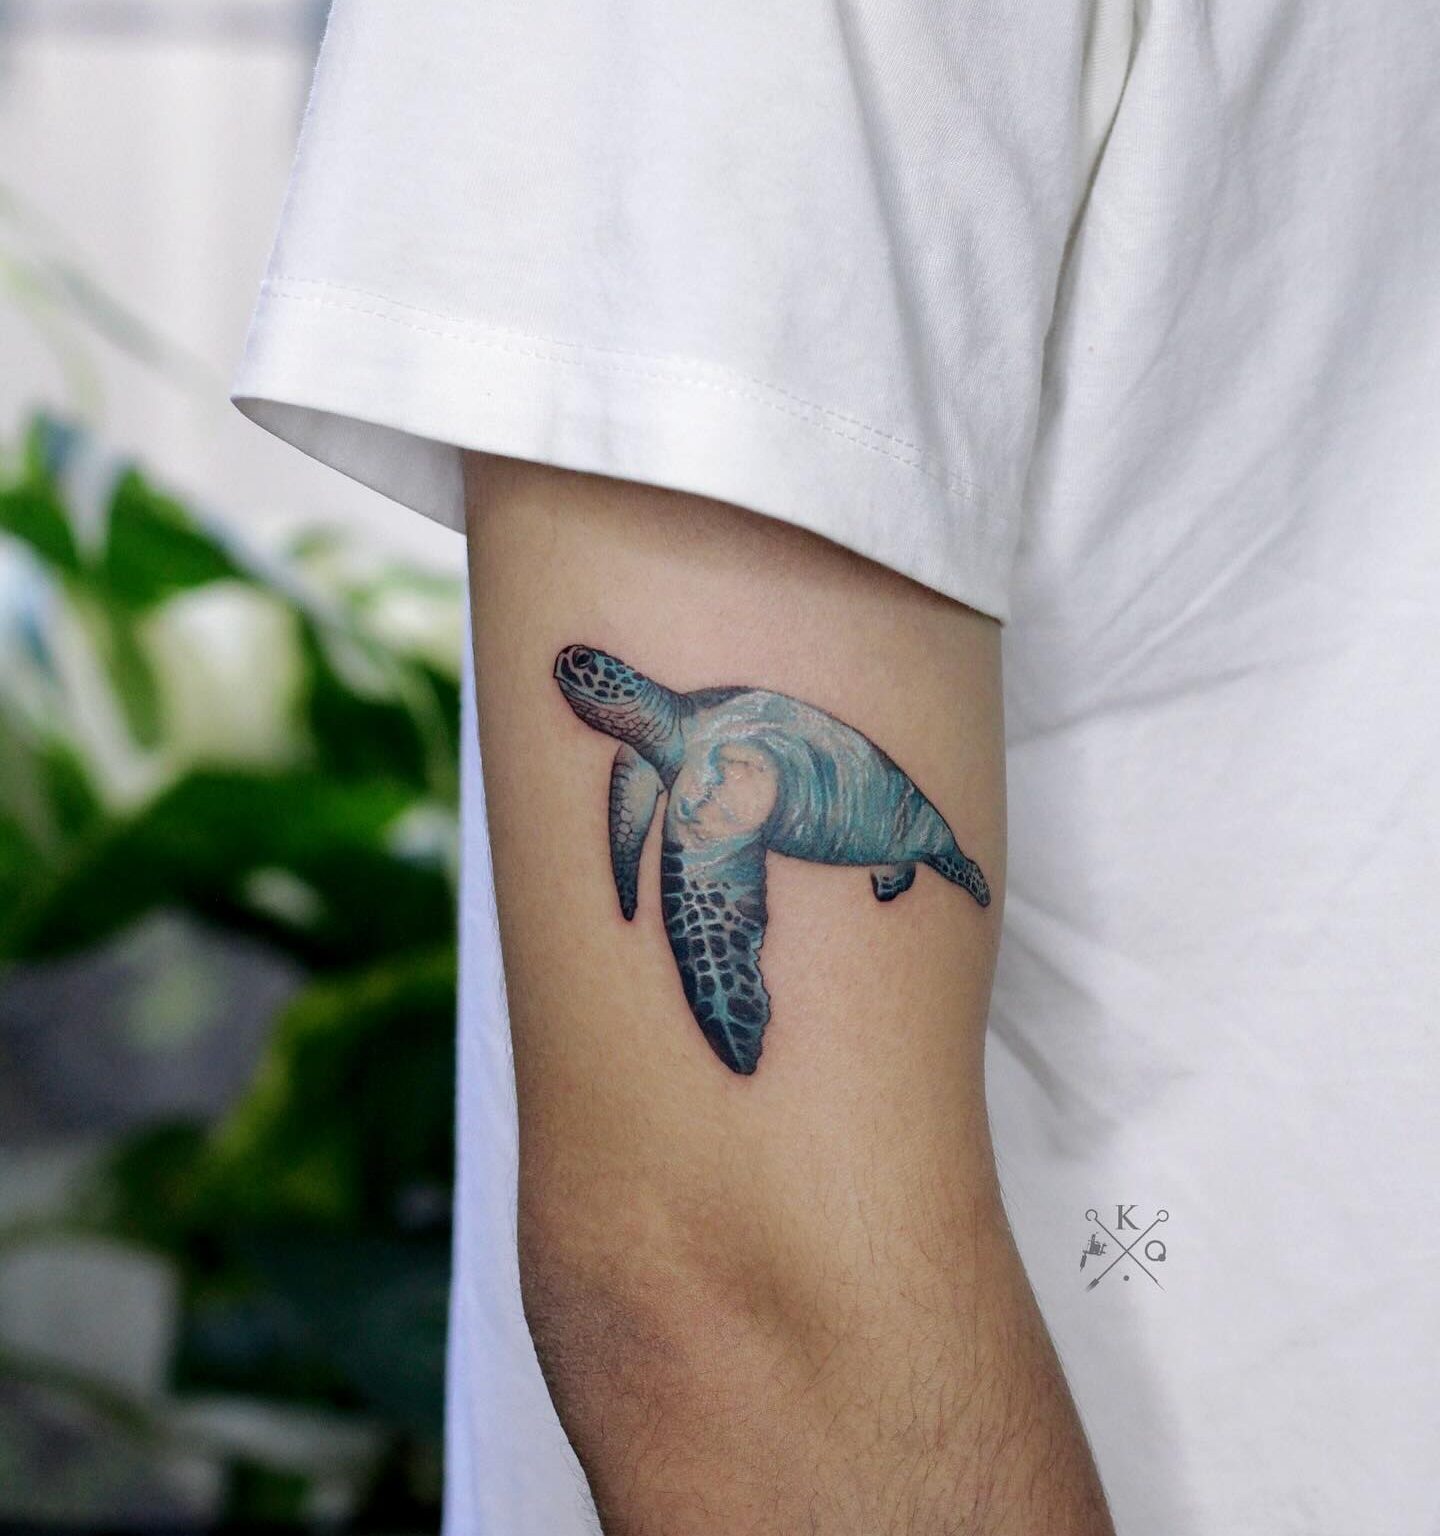 Watercolor style sea turtle tattoo on the right arm